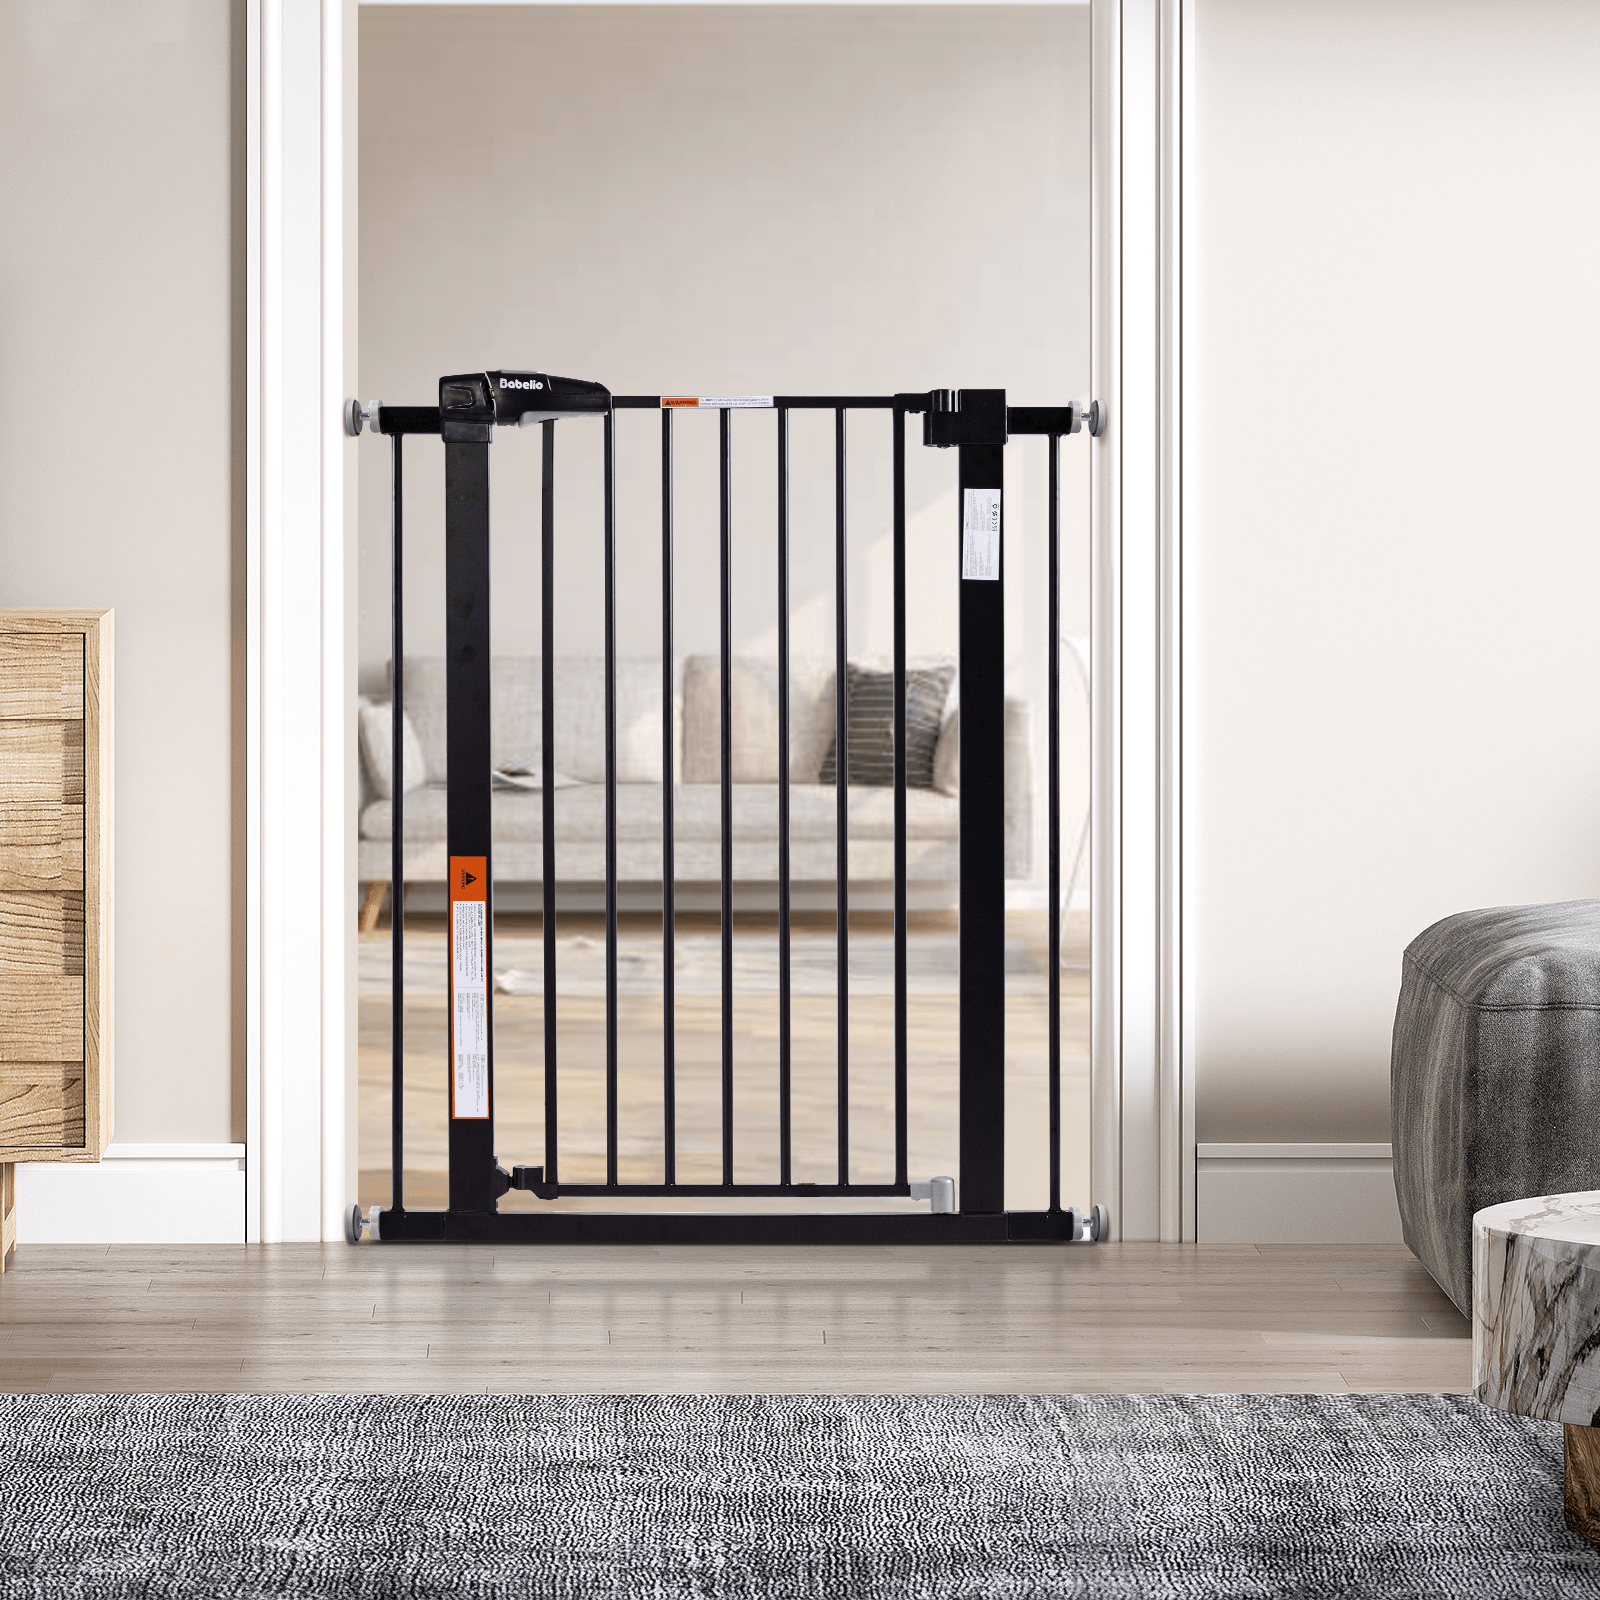 Babelio 36" High Adjustable Metal Safety Gate – Auto-Close, Easy Install, 26-40" Wide, Ideal for Babies & Pets, Black